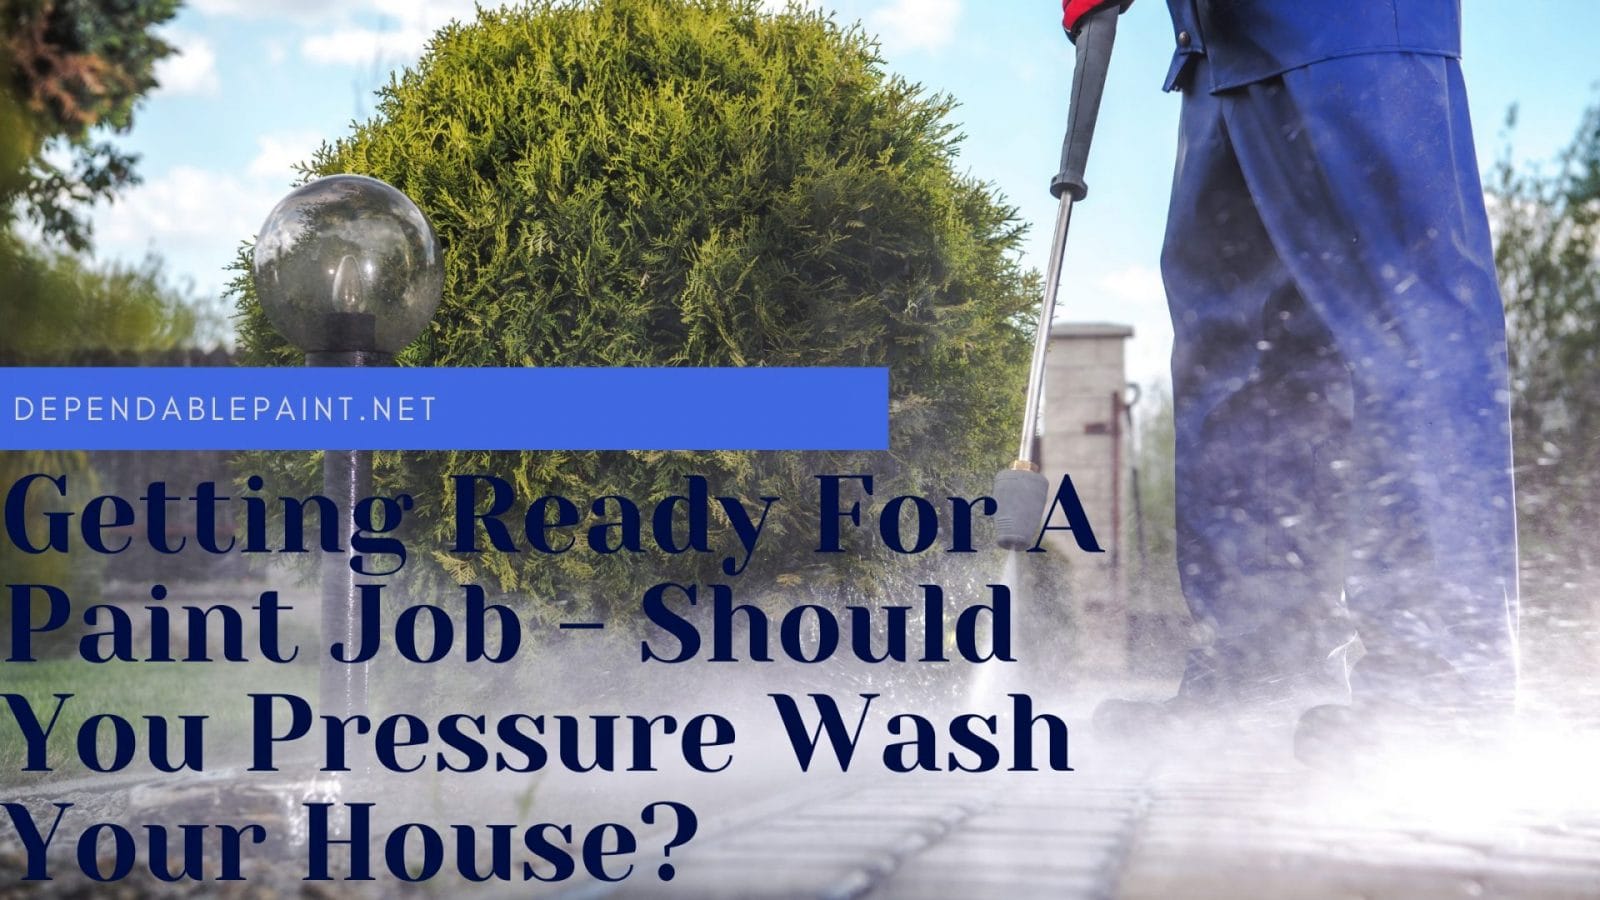 GETTING READY FOR A PAINT JOB - SHOULD YOU PRESSURE WASH YOUR HOUSE